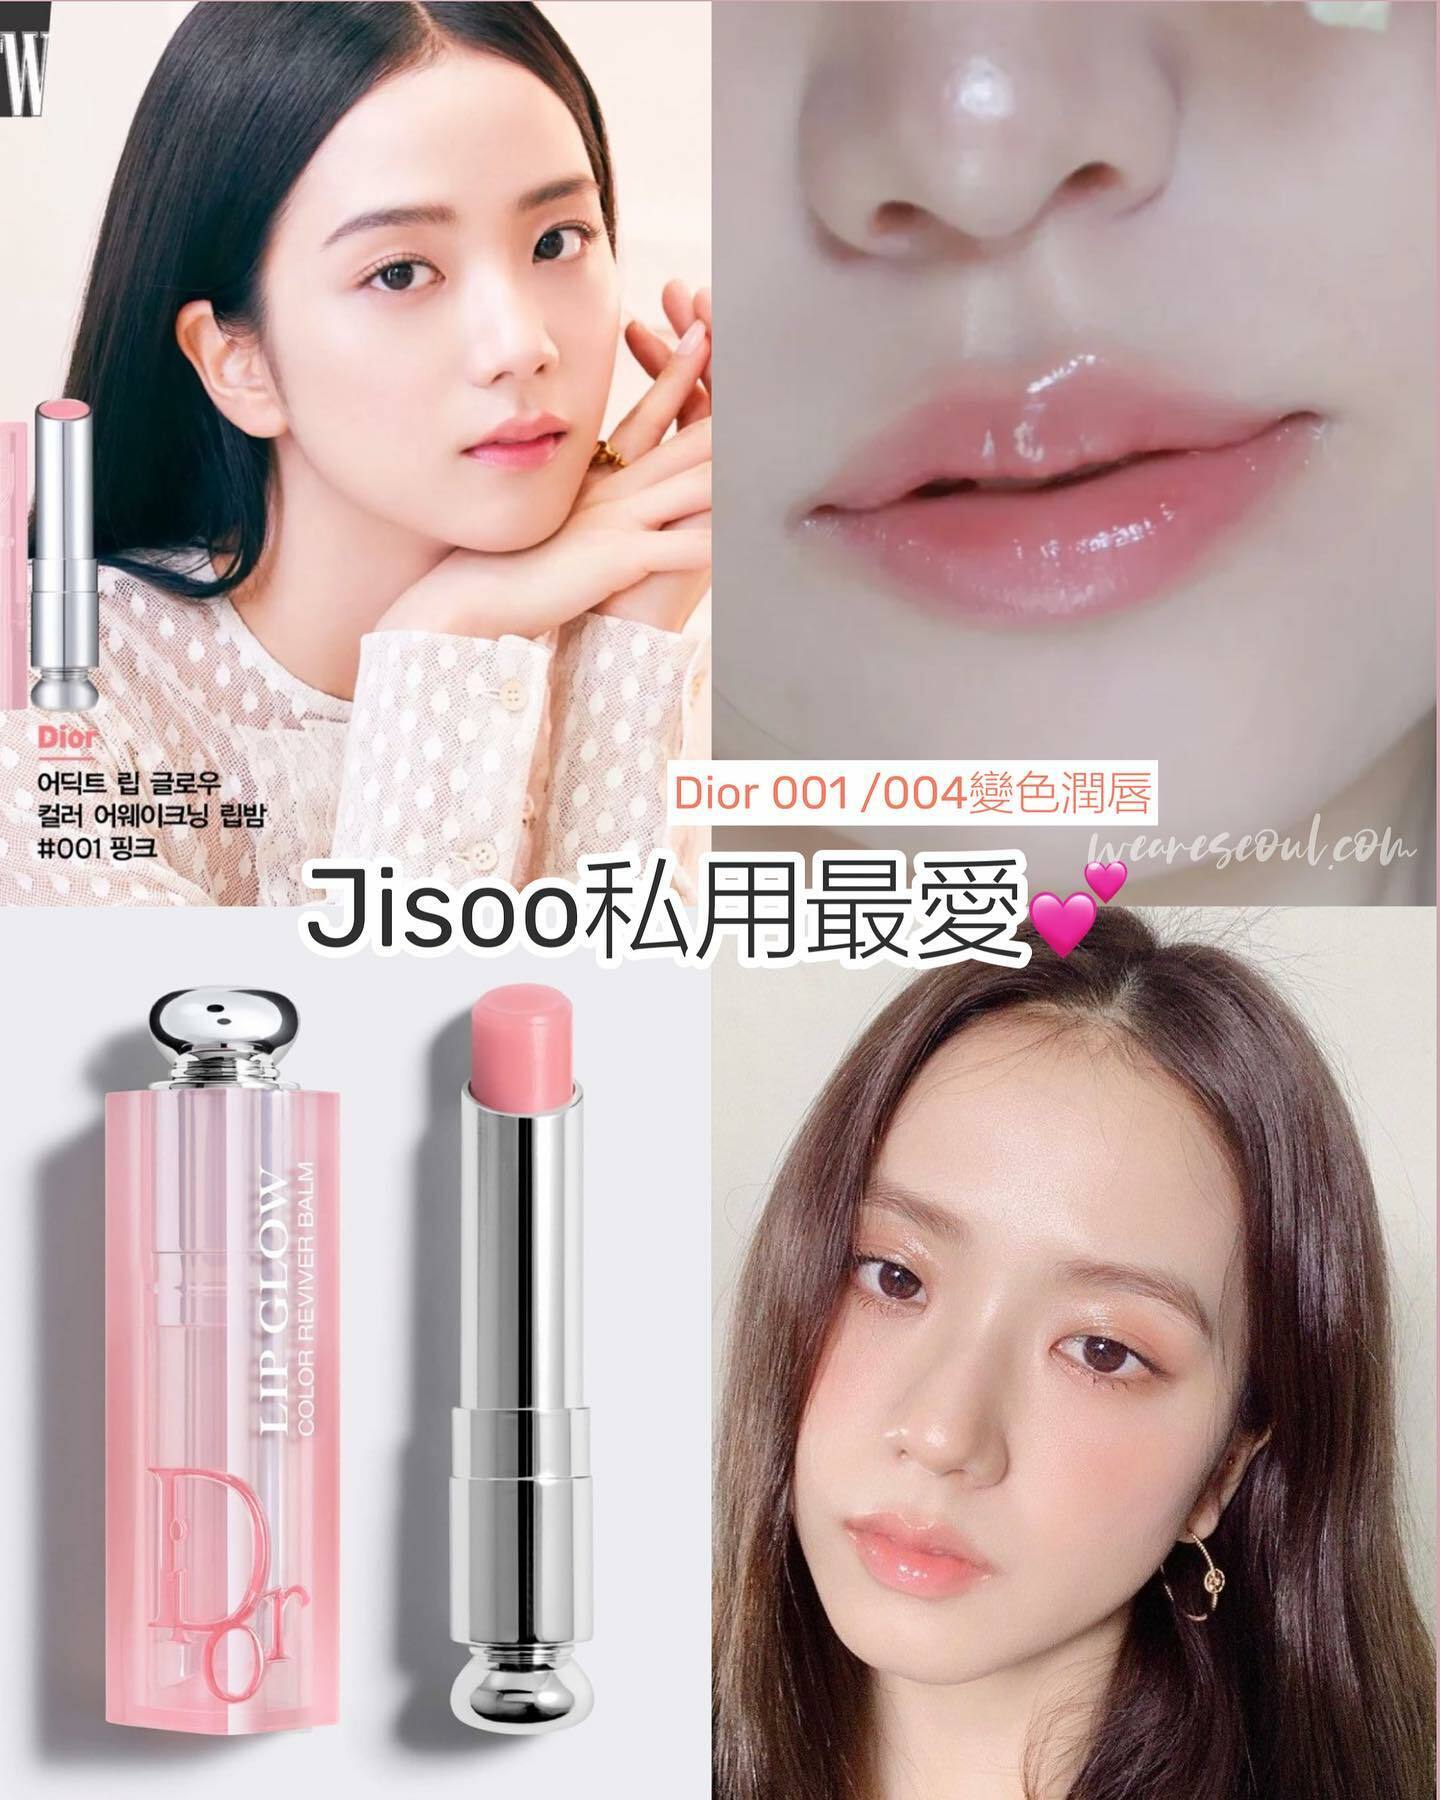 The new Dior Lip Glow as worn by Jisoo Pony Rebecca Lim Kimberly Wang  and more